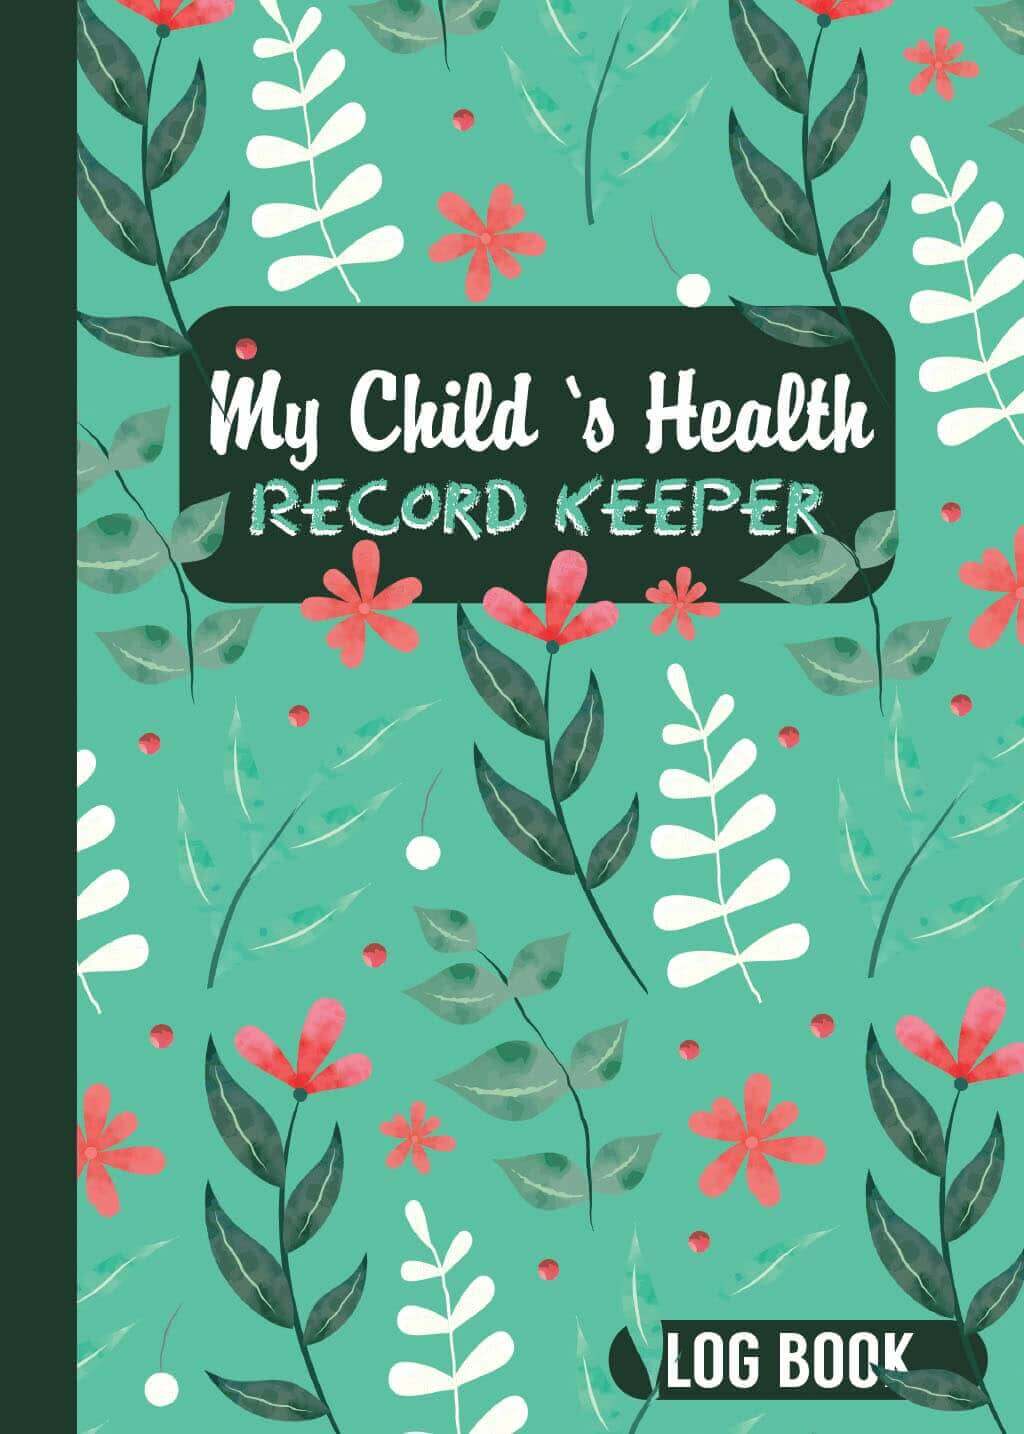 my Child's Health Record Keeper